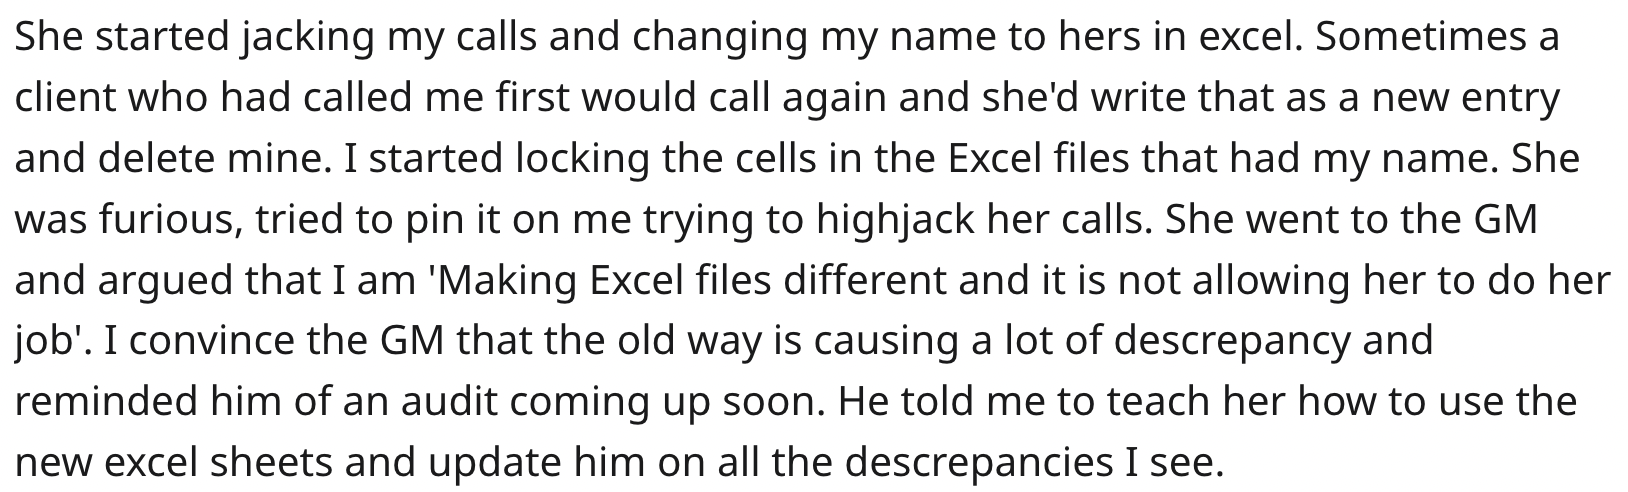 handwriting - She started jacking my calls and changing my name to hers in excel. Sometimes a client who had called me first would call again and she'd write that as a new entry and delete mine. I started locking the cells in the Excel files that had my n